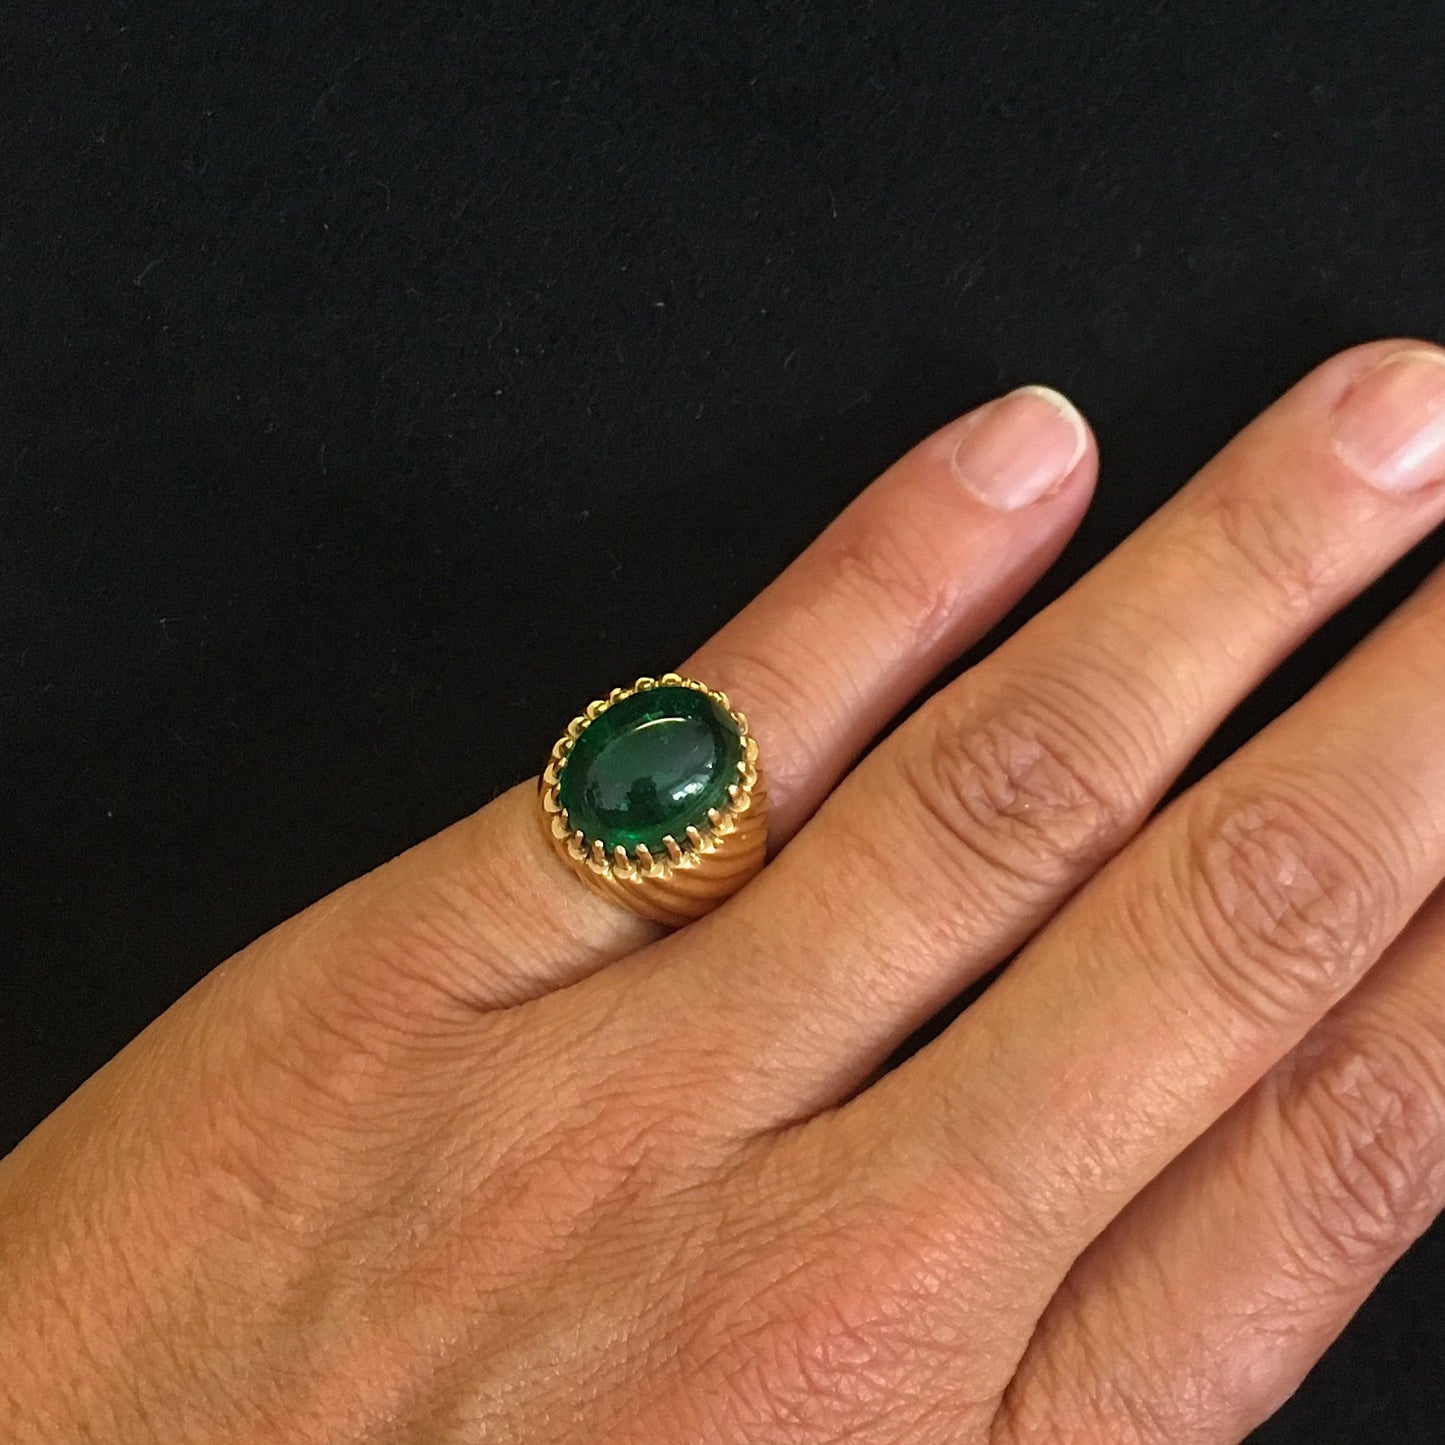 French 1950s 18KT Yellow Gold Emerald Ring on finger